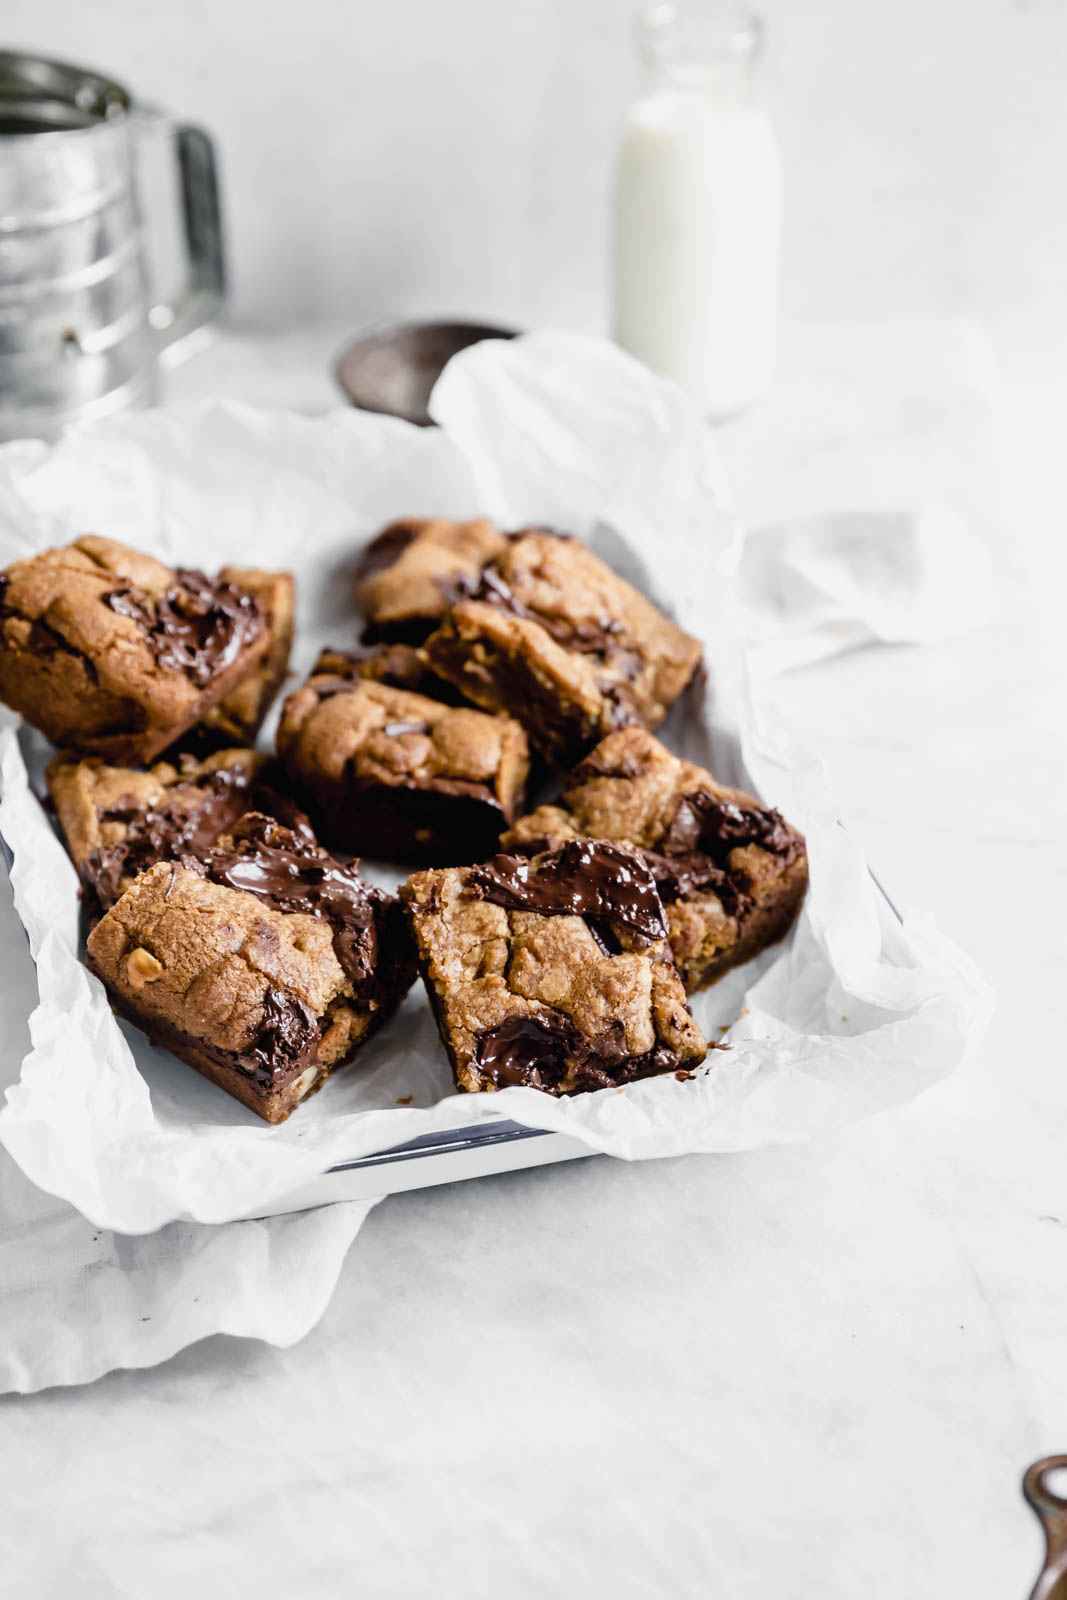 Brown Butter Nutella Chocolate Chip Cookie Bars with fat swirls of Nutella and lightly toasted hazelnuts.